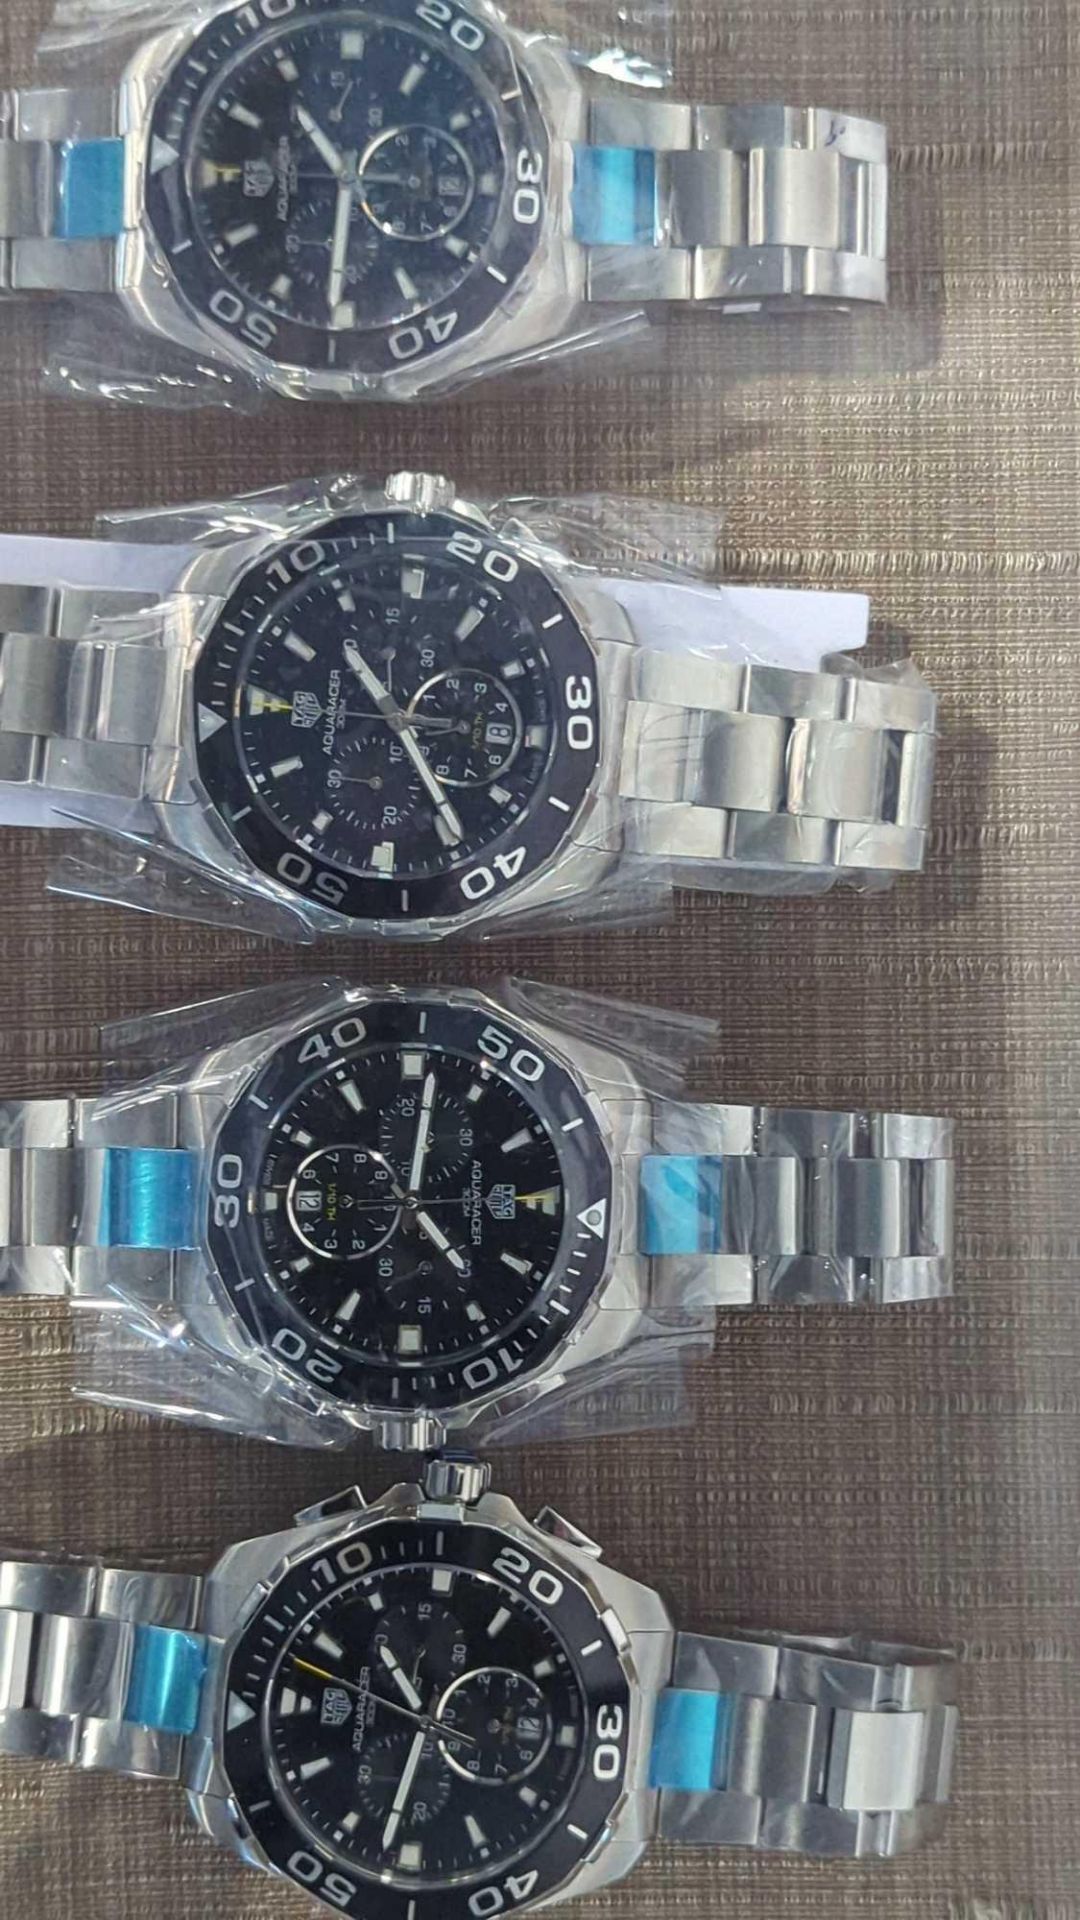 4 Replica Tag Heuer Watches - Image 5 of 5